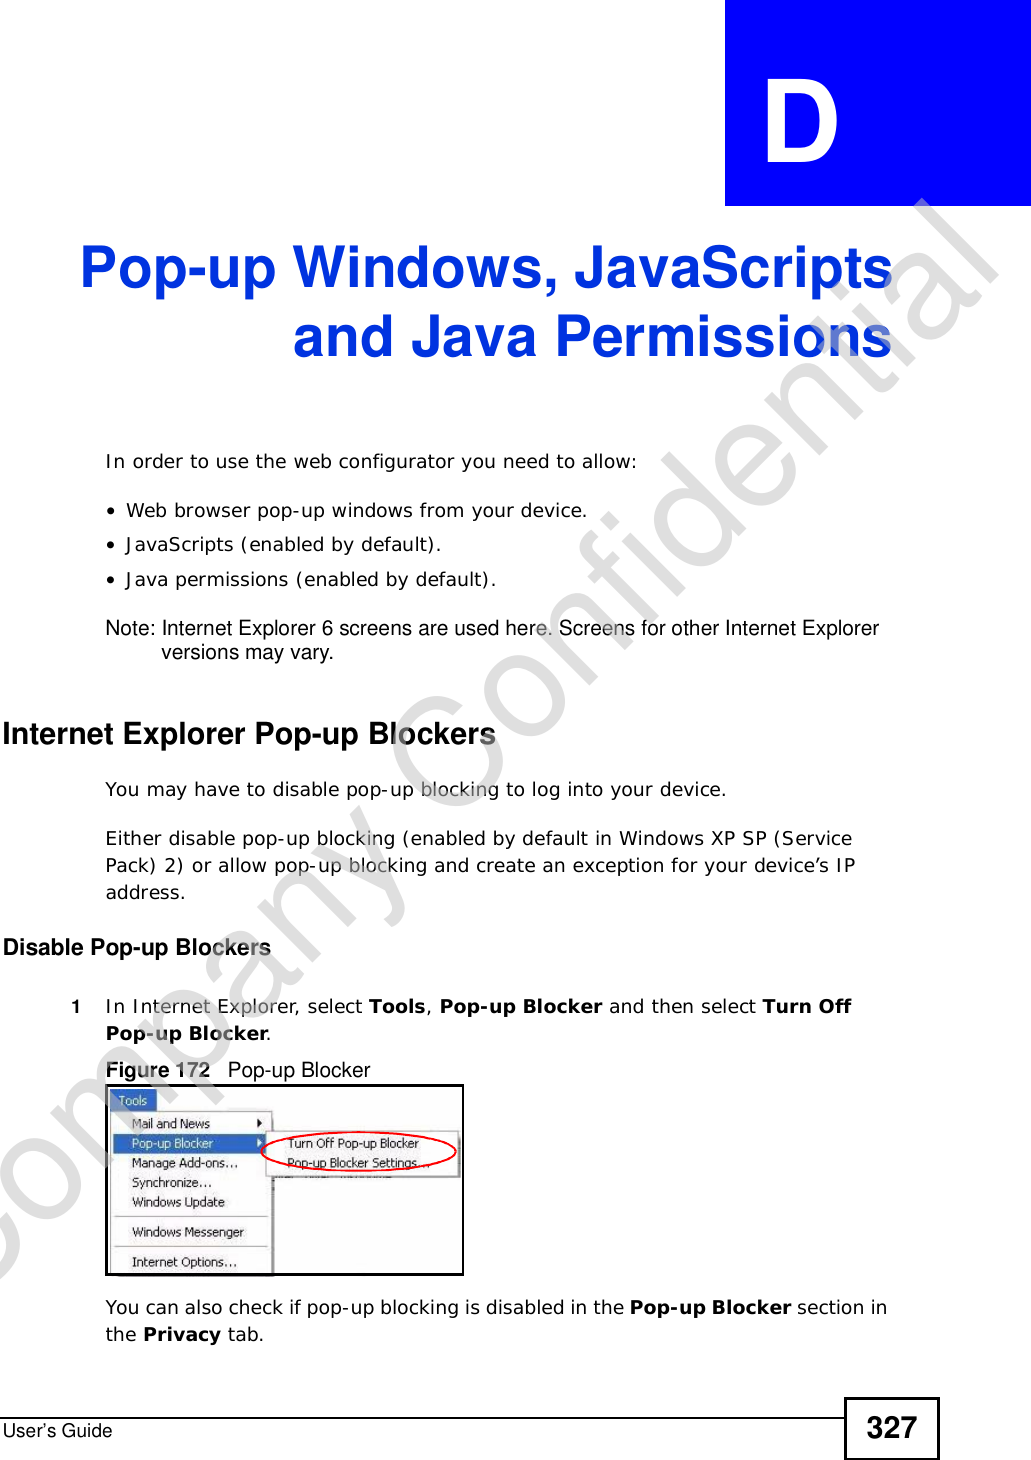 User’s Guide 327APPENDIX  D Pop-up Windows, JavaScriptsand Java PermissionsIn order to use the web configurator you need to allow:•Web browser pop-up windows from your device.•JavaScripts (enabled by default).•Java permissions (enabled by default).Note: Internet Explorer 6 screens are used here. Screens for other Internet Explorer versions may vary.Internet Explorer Pop-up BlockersYou may have to disable pop-up blocking to log into your device. Either disable pop-up blocking (enabled by default in Windows XP SP (Service Pack) 2) or allow pop-up blocking and create an exception for your device’s IP address.Disable Pop-up Blockers1In Internet Explorer, select Tools,Pop-up Blocker and then select Turn Off Pop-up Blocker.Figure 172   Pop-up BlockerYou can also check if pop-up blocking is disabled in the Pop-up Blocker section in the Privacy tab. Company Confidential